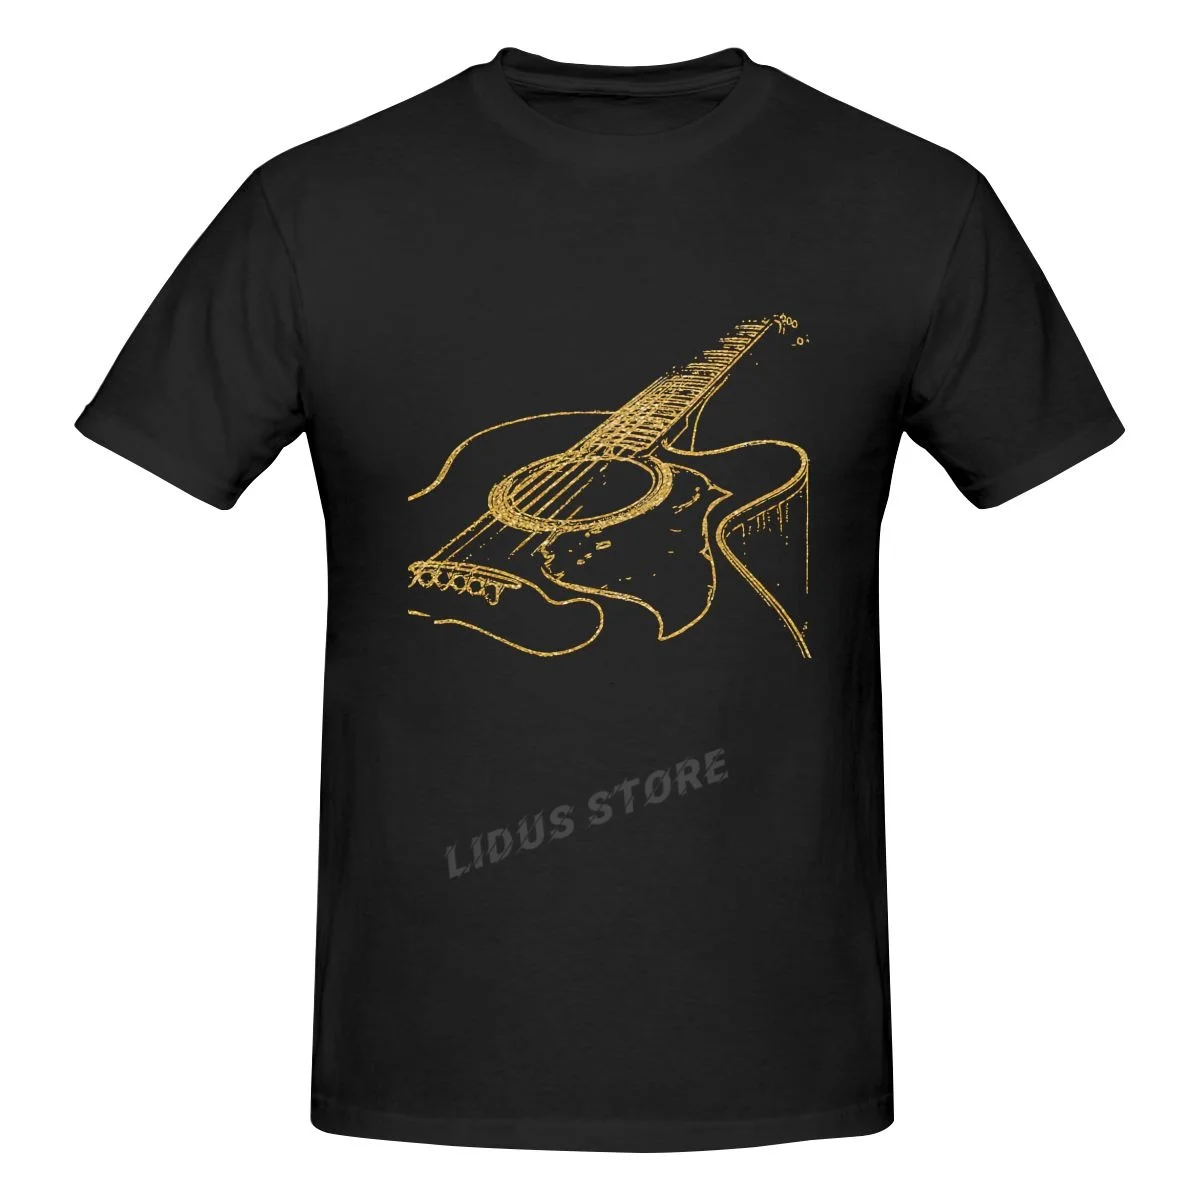 

Acoustic Guitar T Shirt, Musicians Shirts, Guitarist Tshirts, Music Tees, Music Lover Musician Gifts For Men